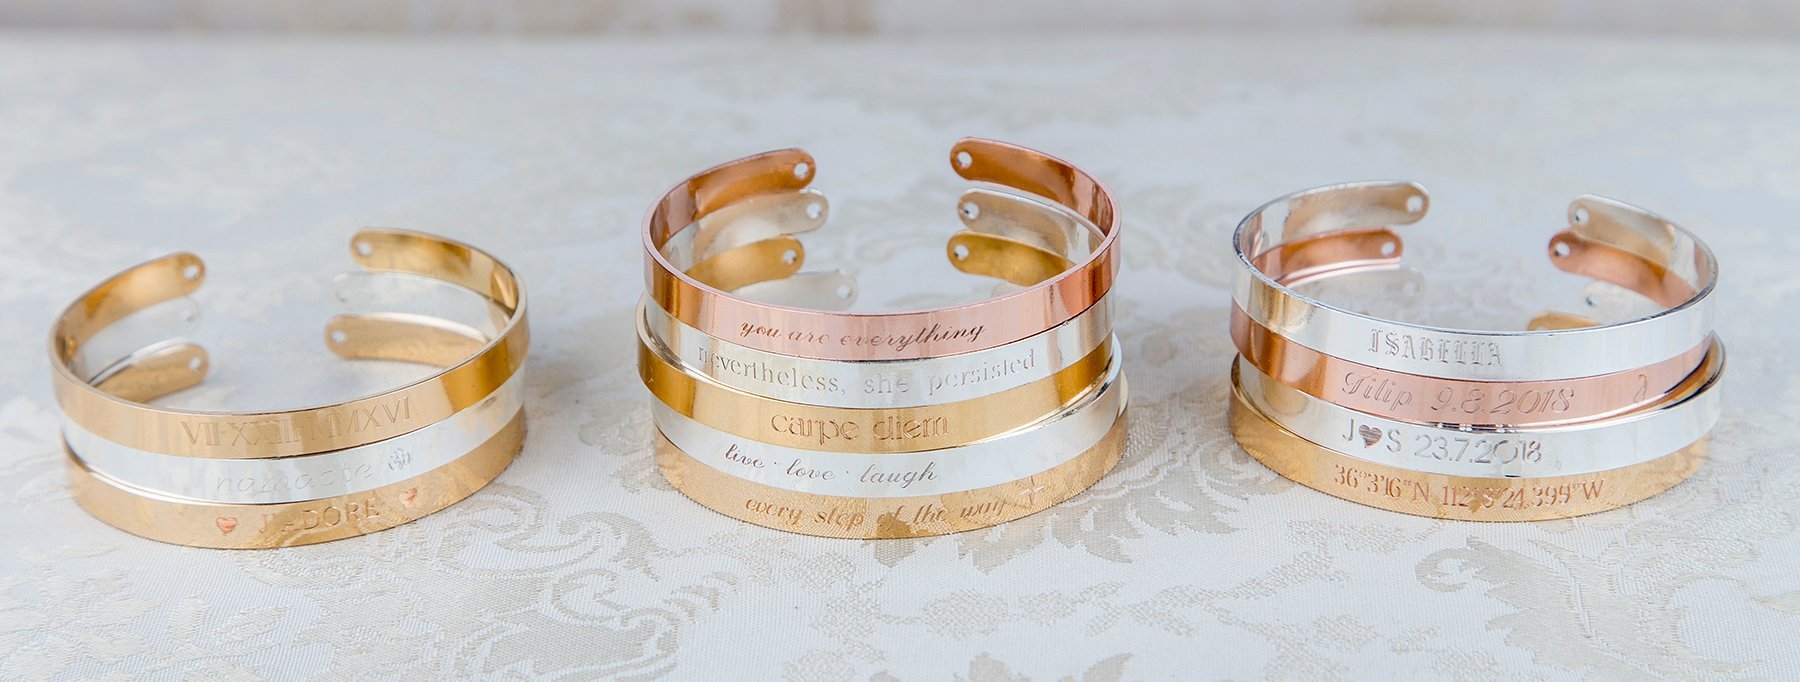 Engraved bracelet, personalized inspirational quote engraved gift, mom